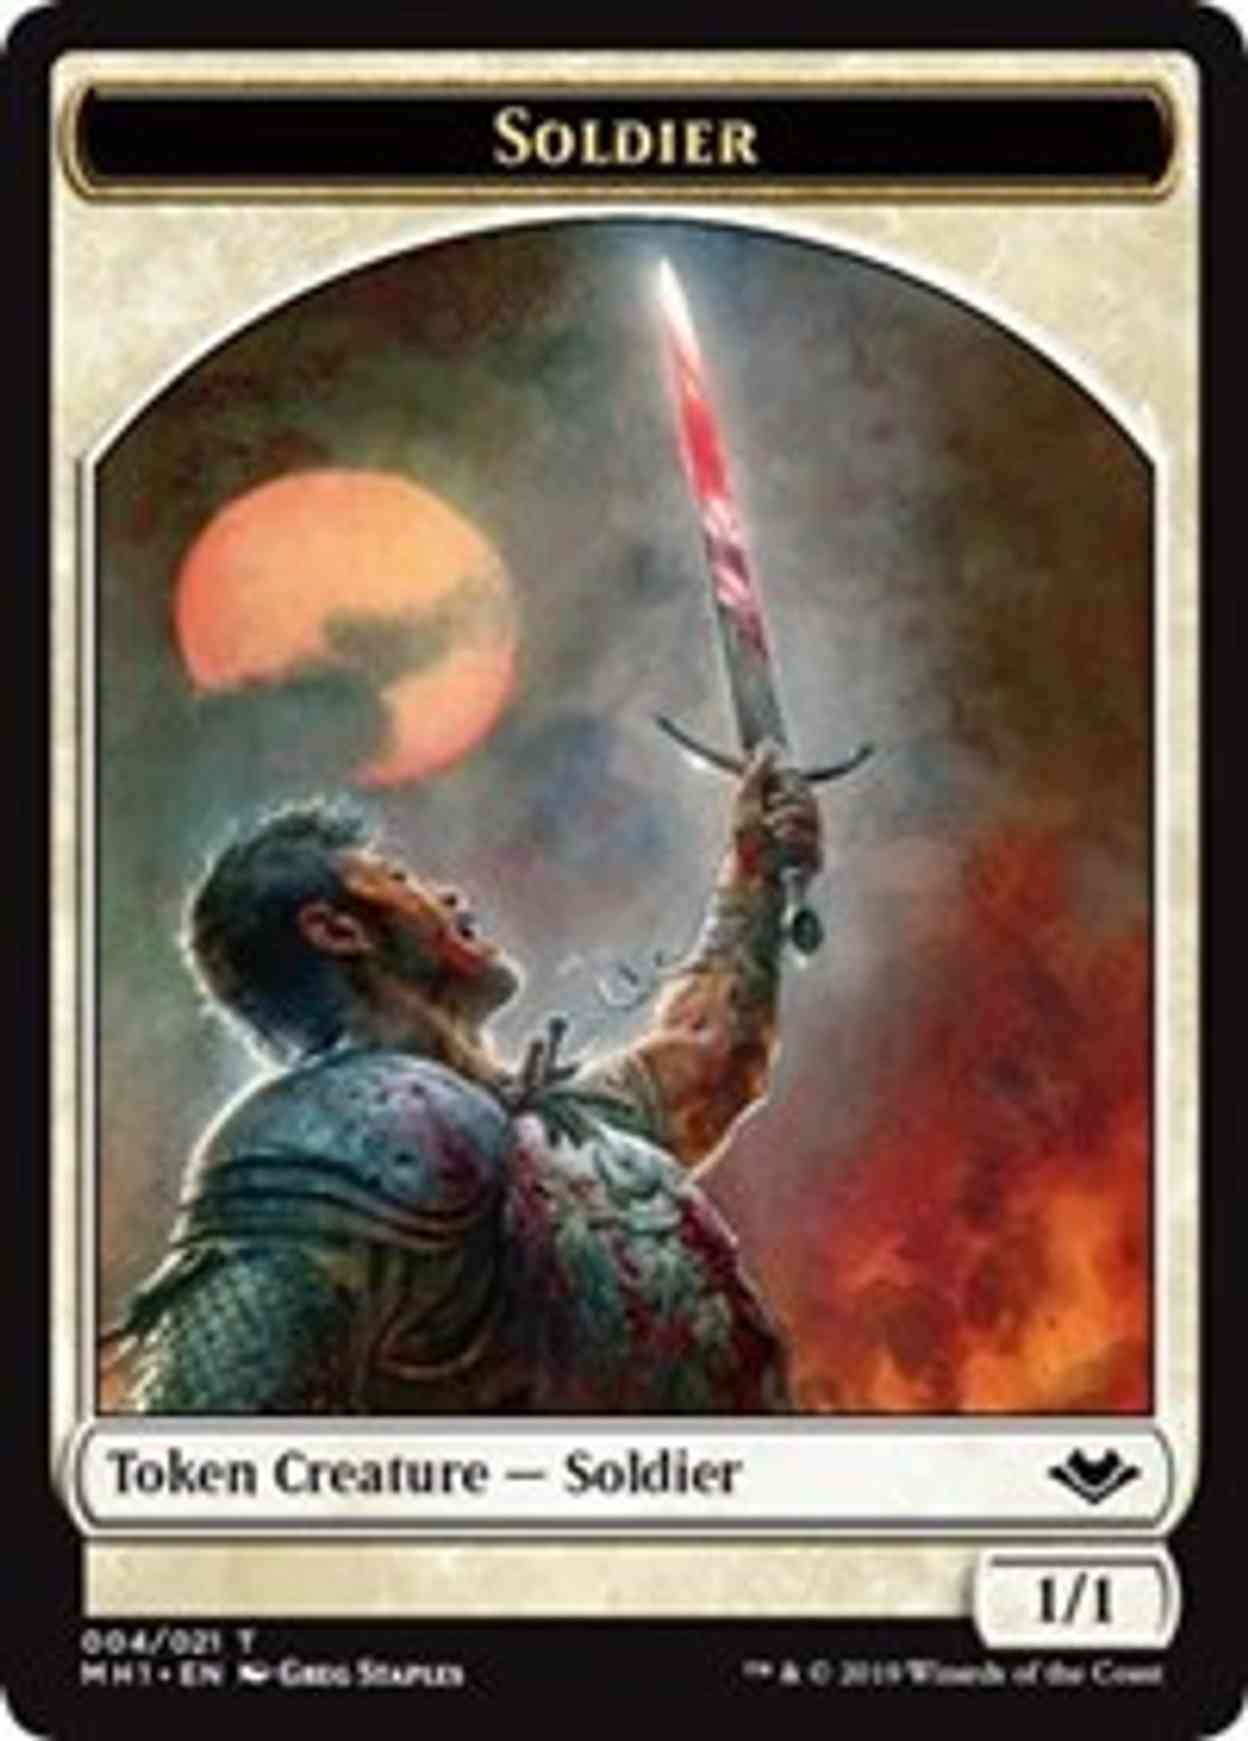 Soldier (004) // Construct (017) Double-sided Token magic card front